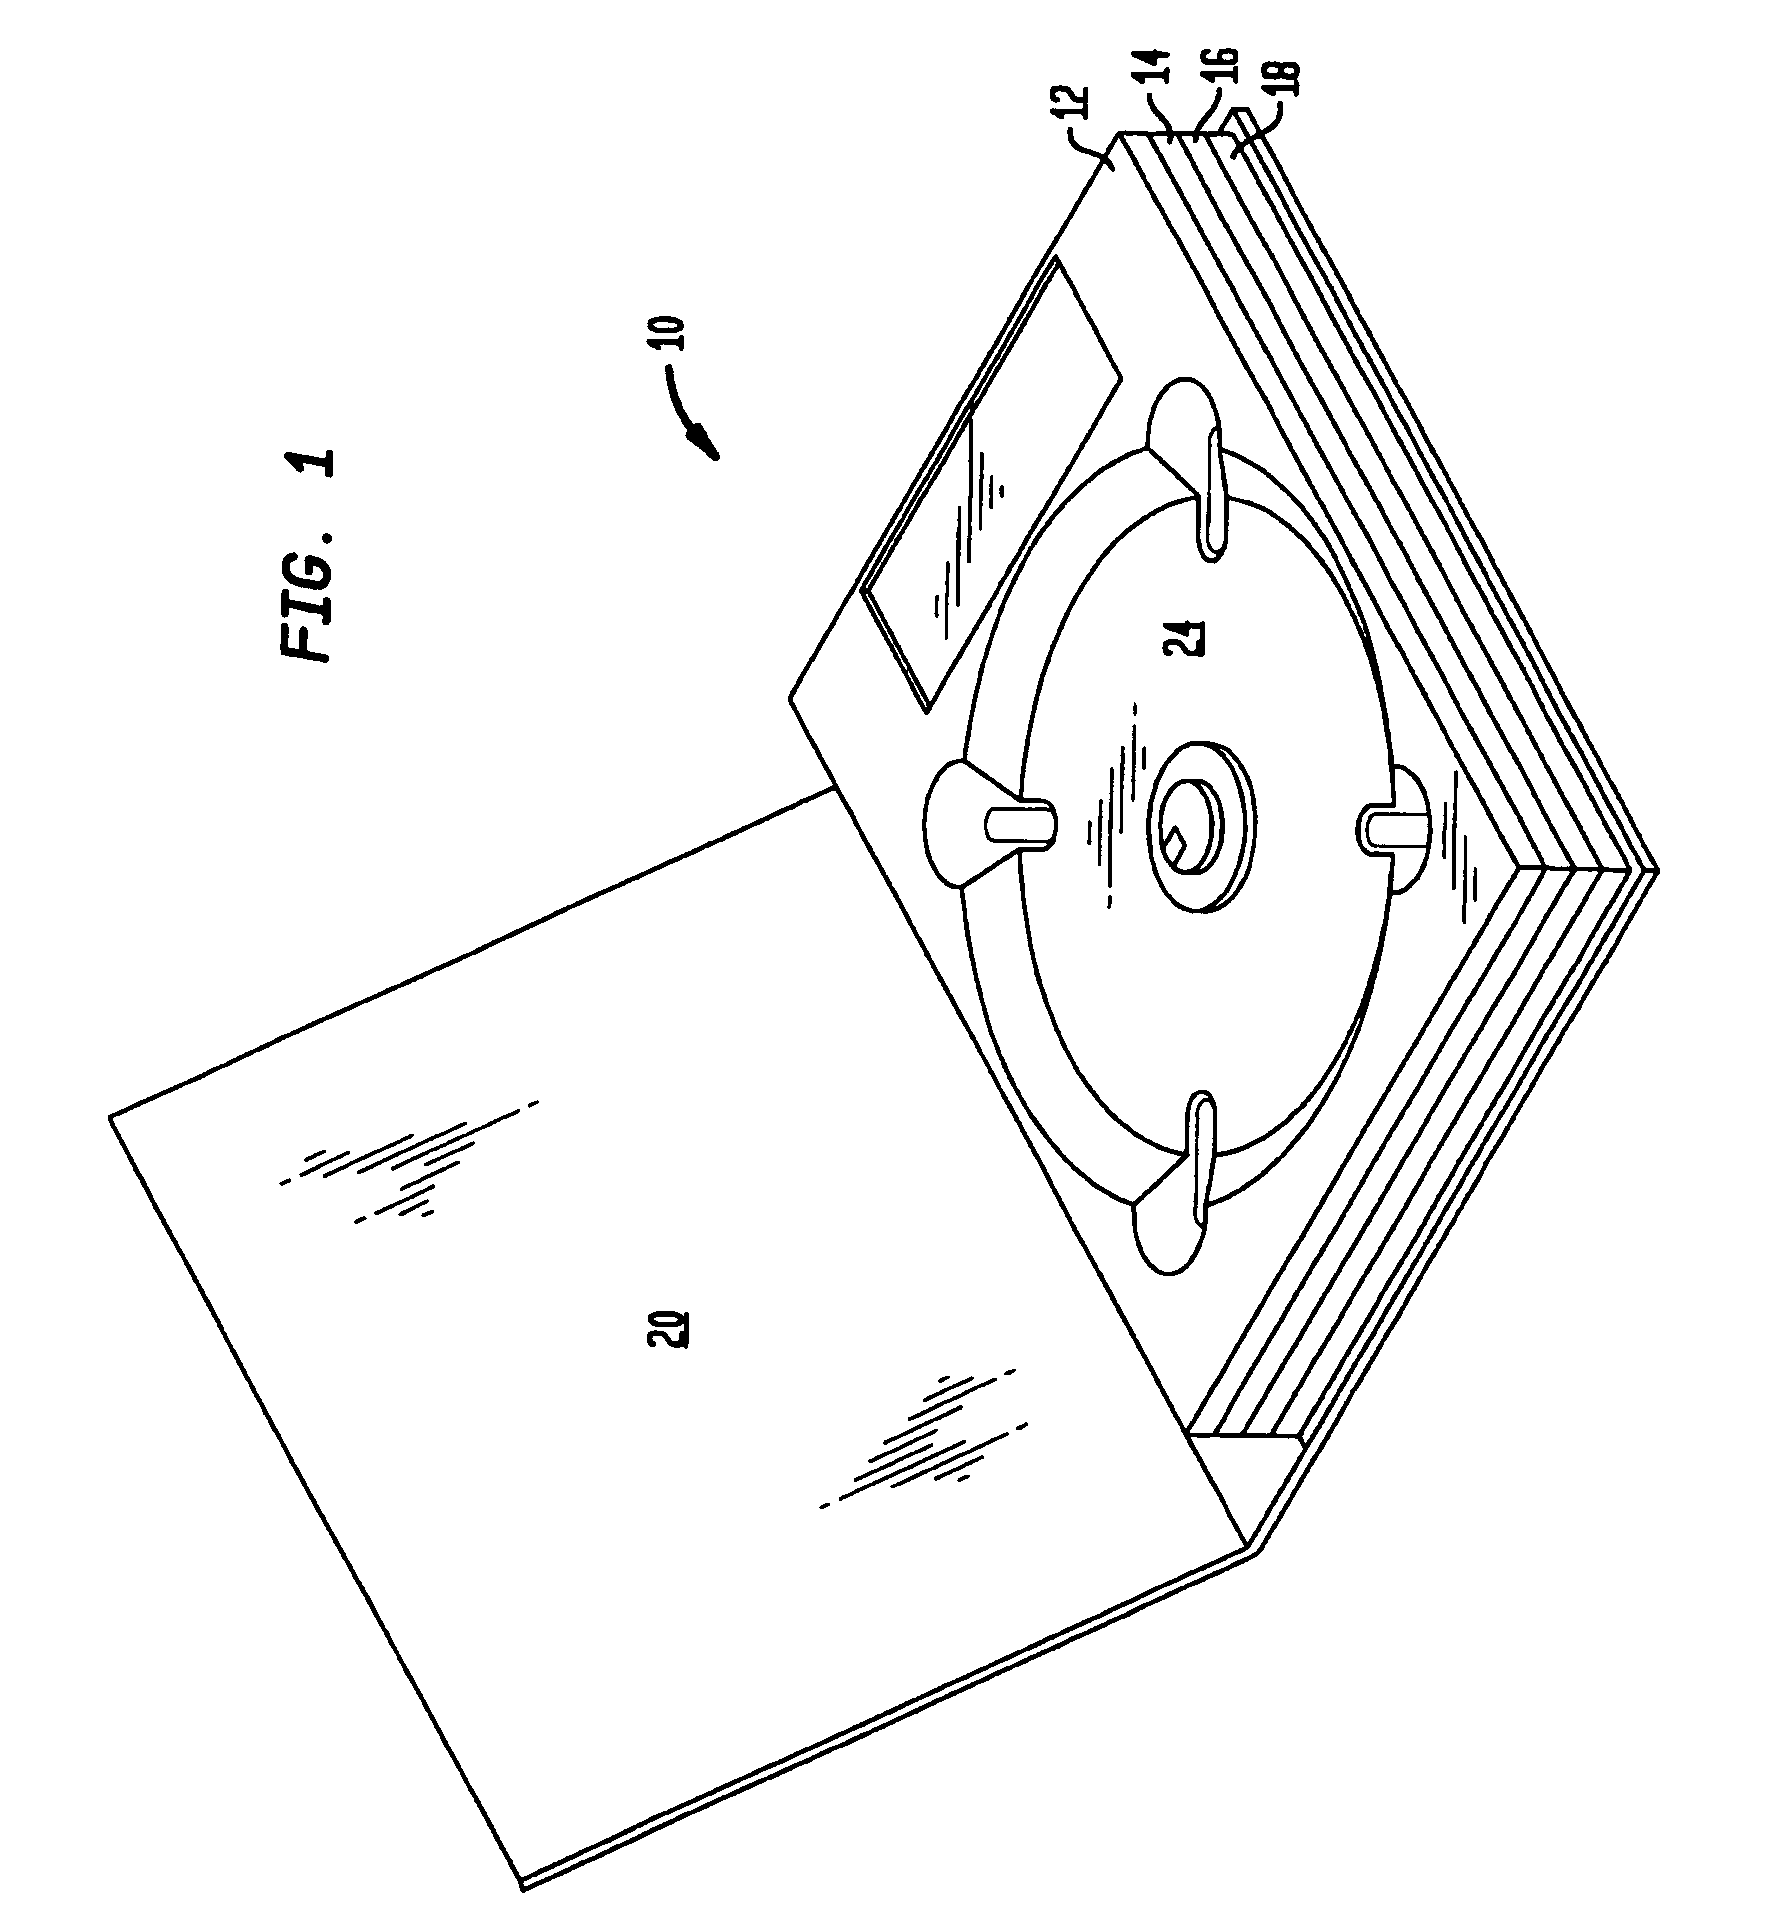 Packaging for multiple media discs and methods for making same